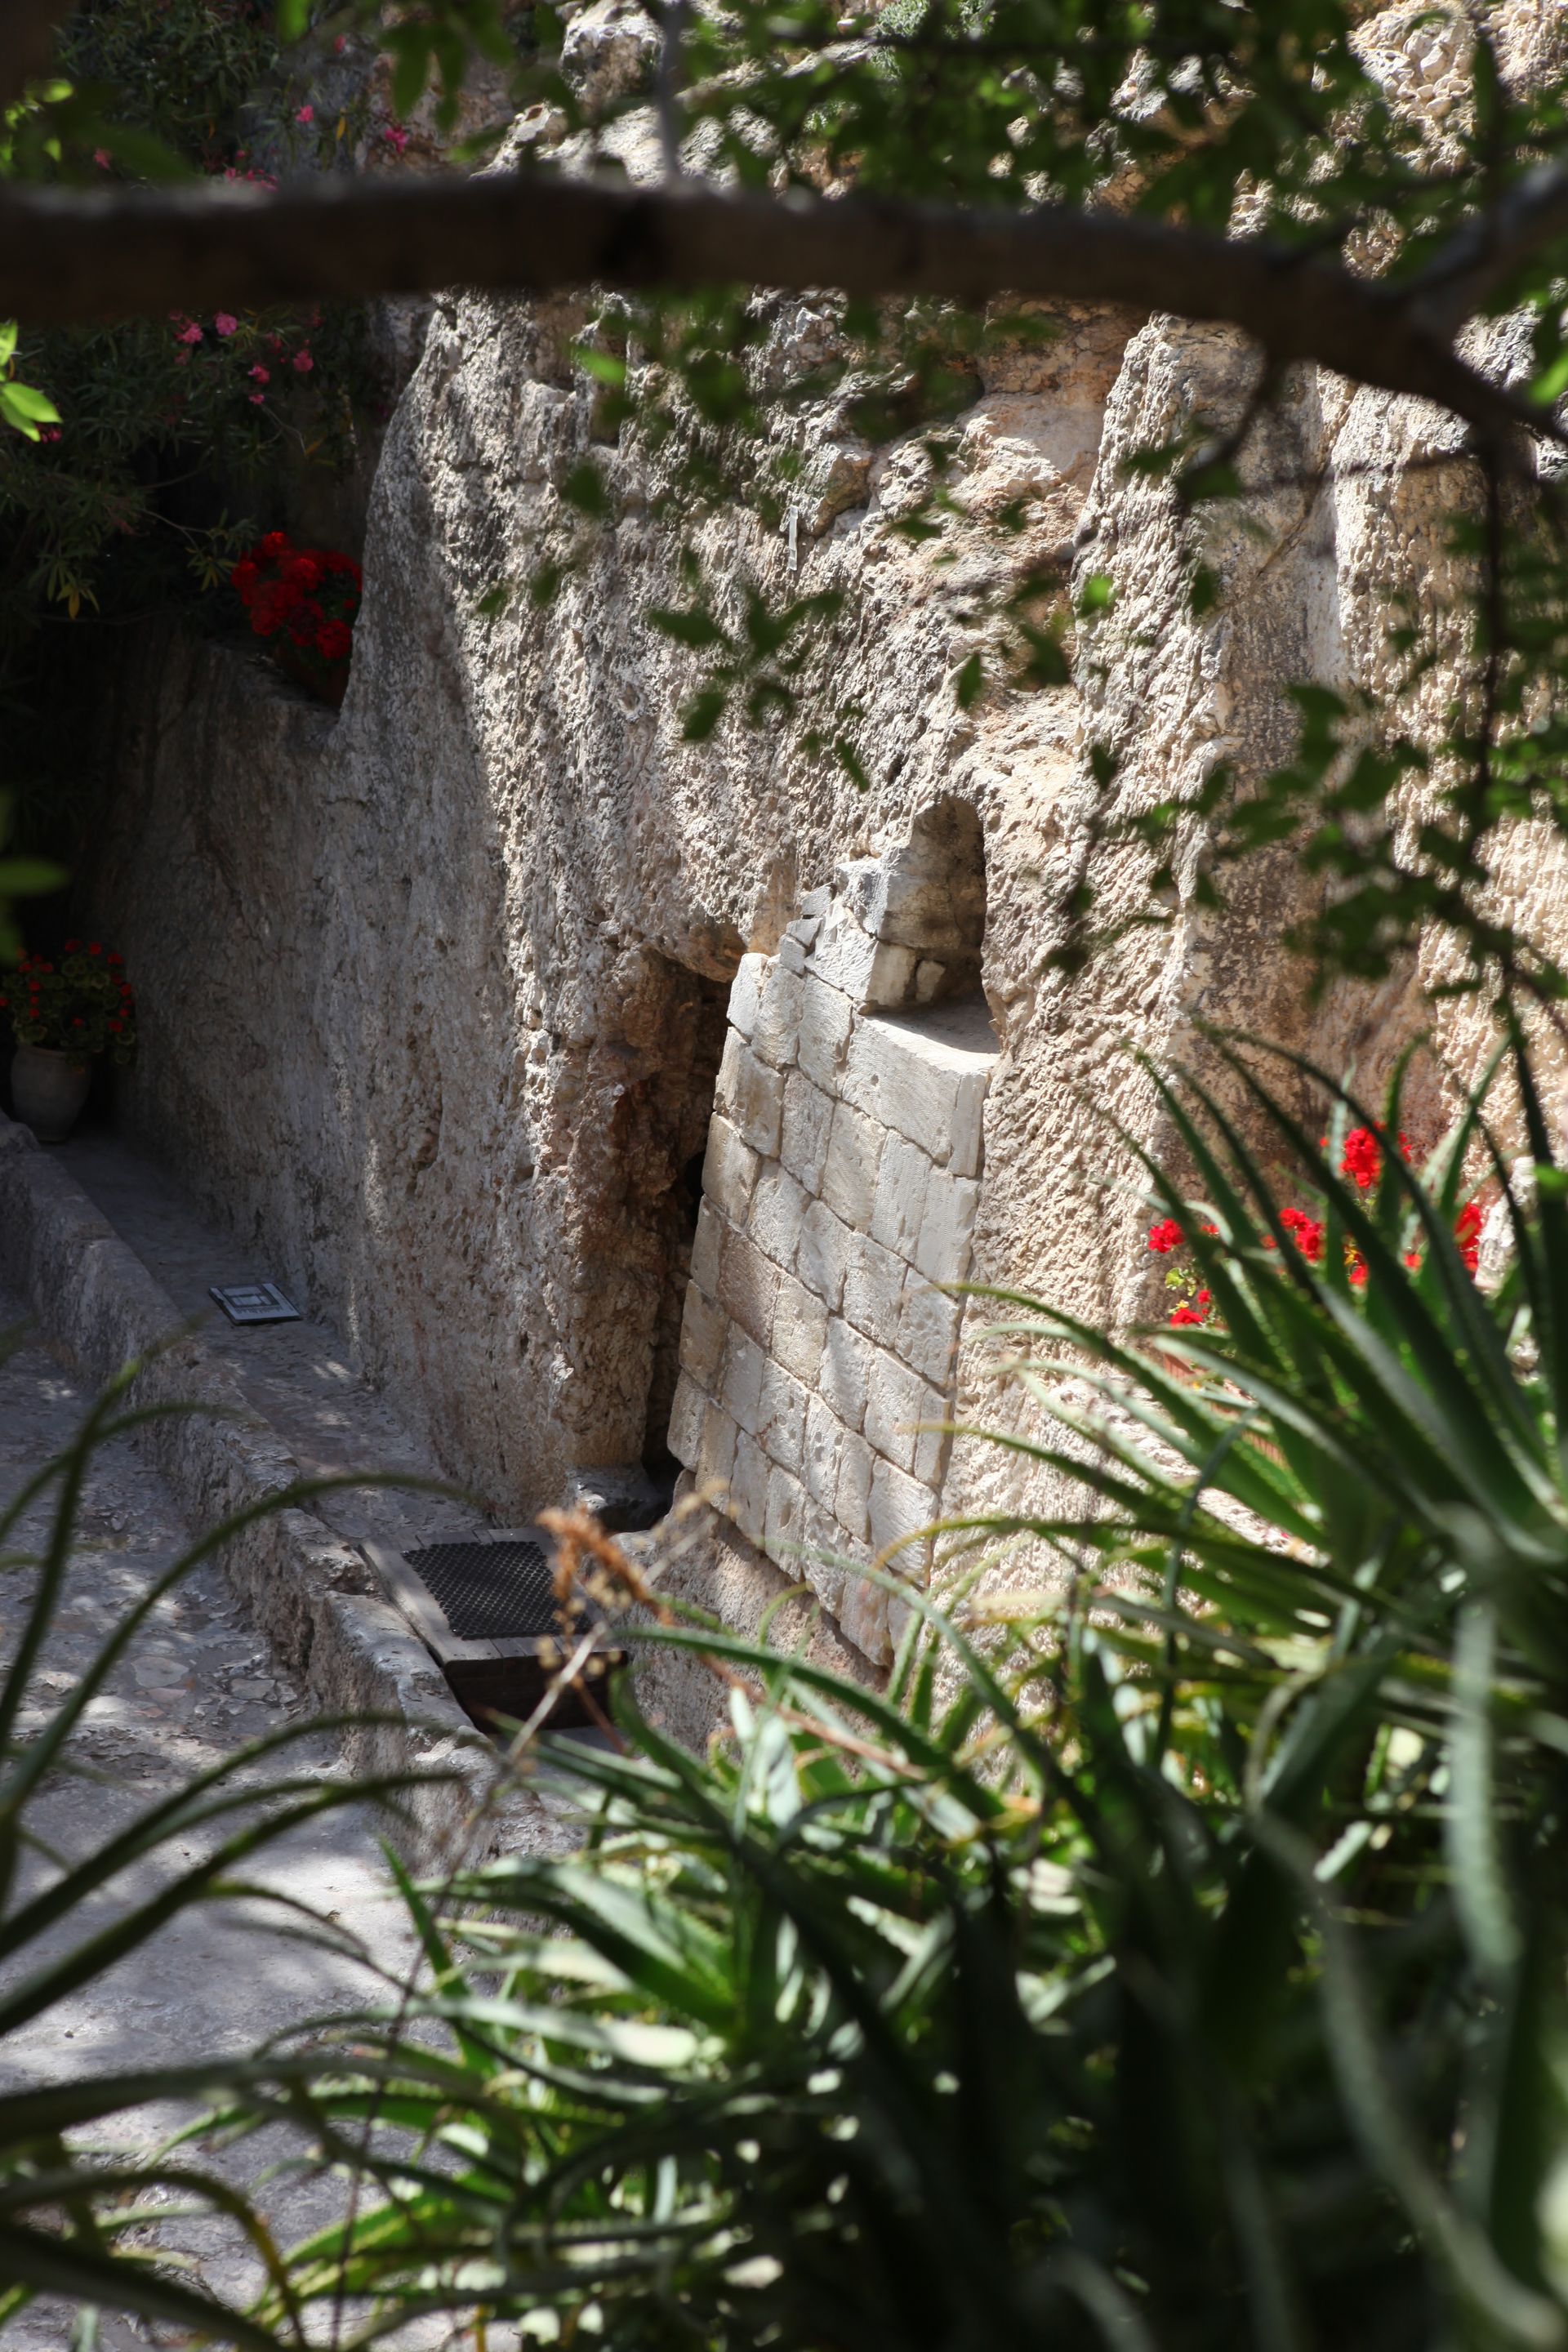 An image of the entrance to the Garden Tomb in Jerusalem.